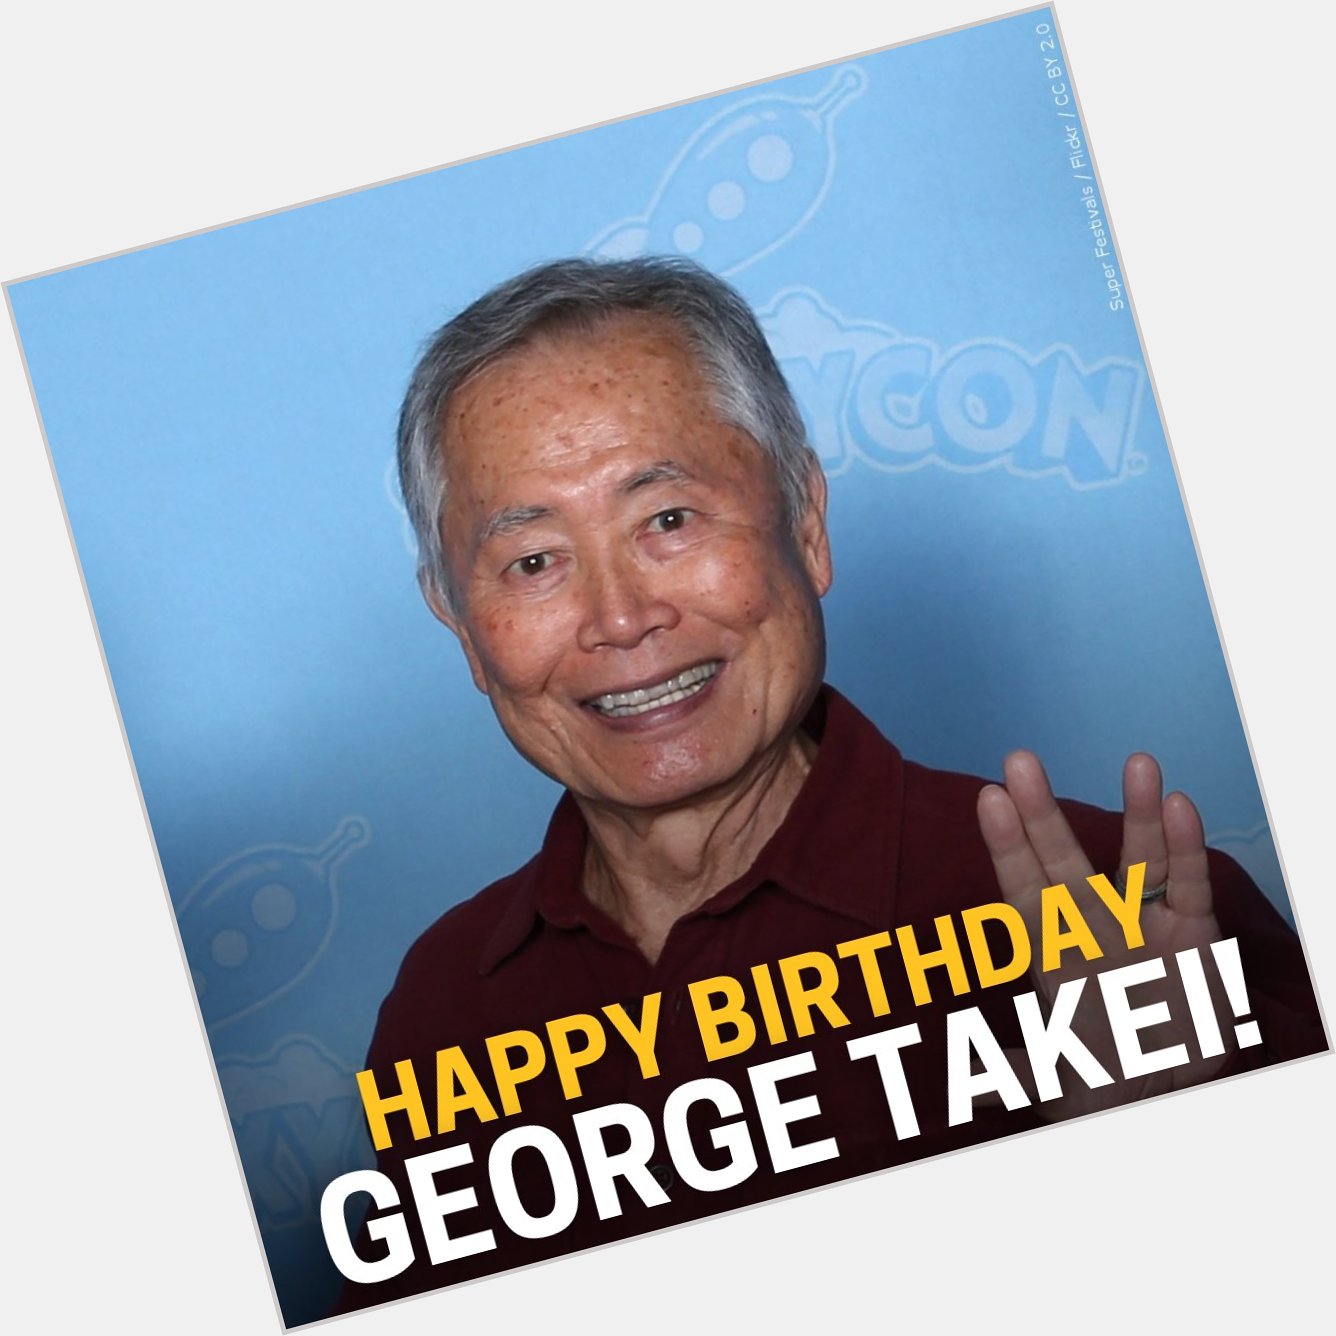 HAPPY BIRTHDAY! George Takei, who is known for his role as Mr. Sulu on Star Trek, turns 86 today! 